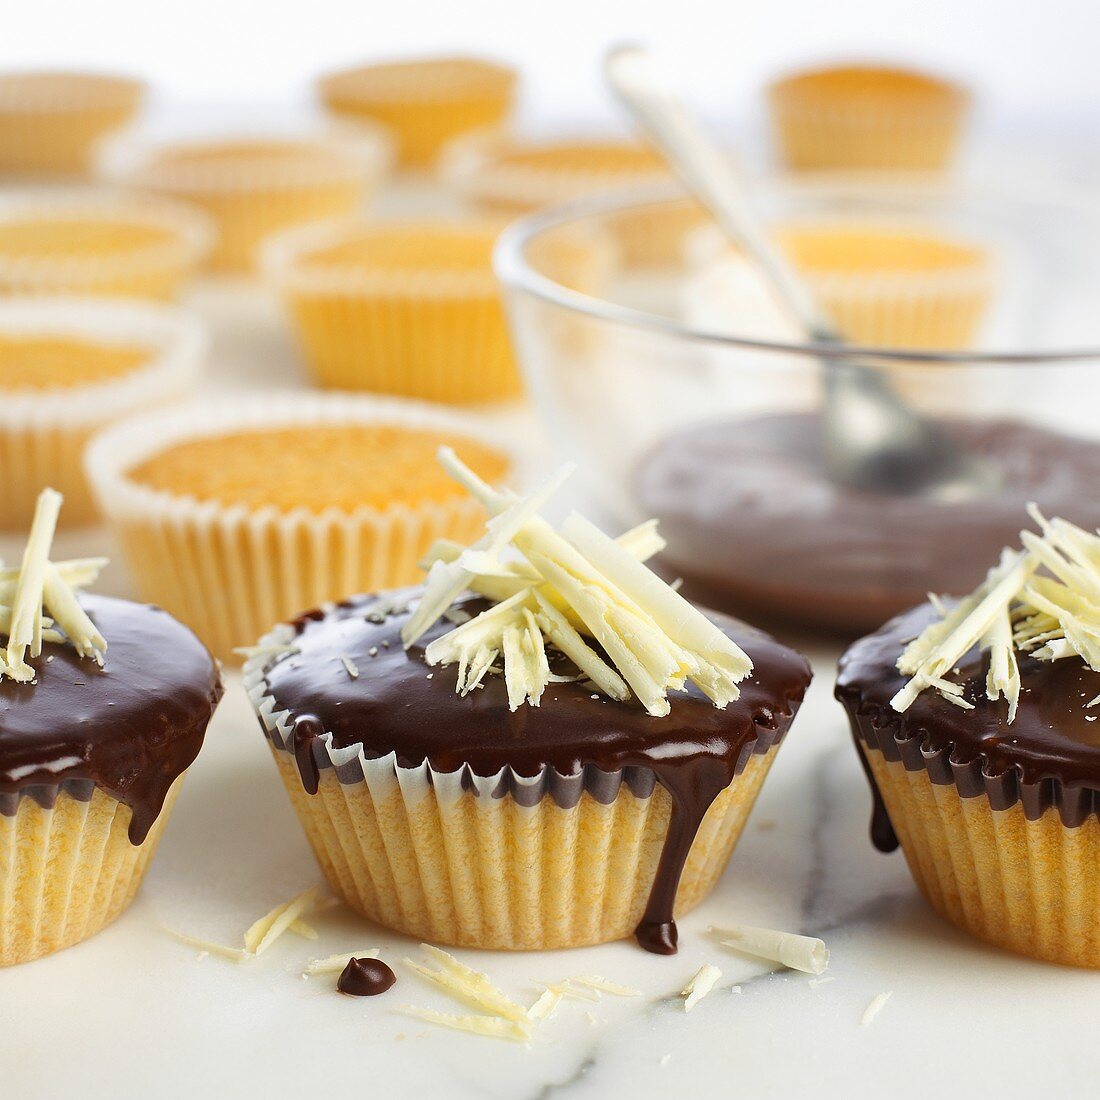 Cupcakes with chocolate